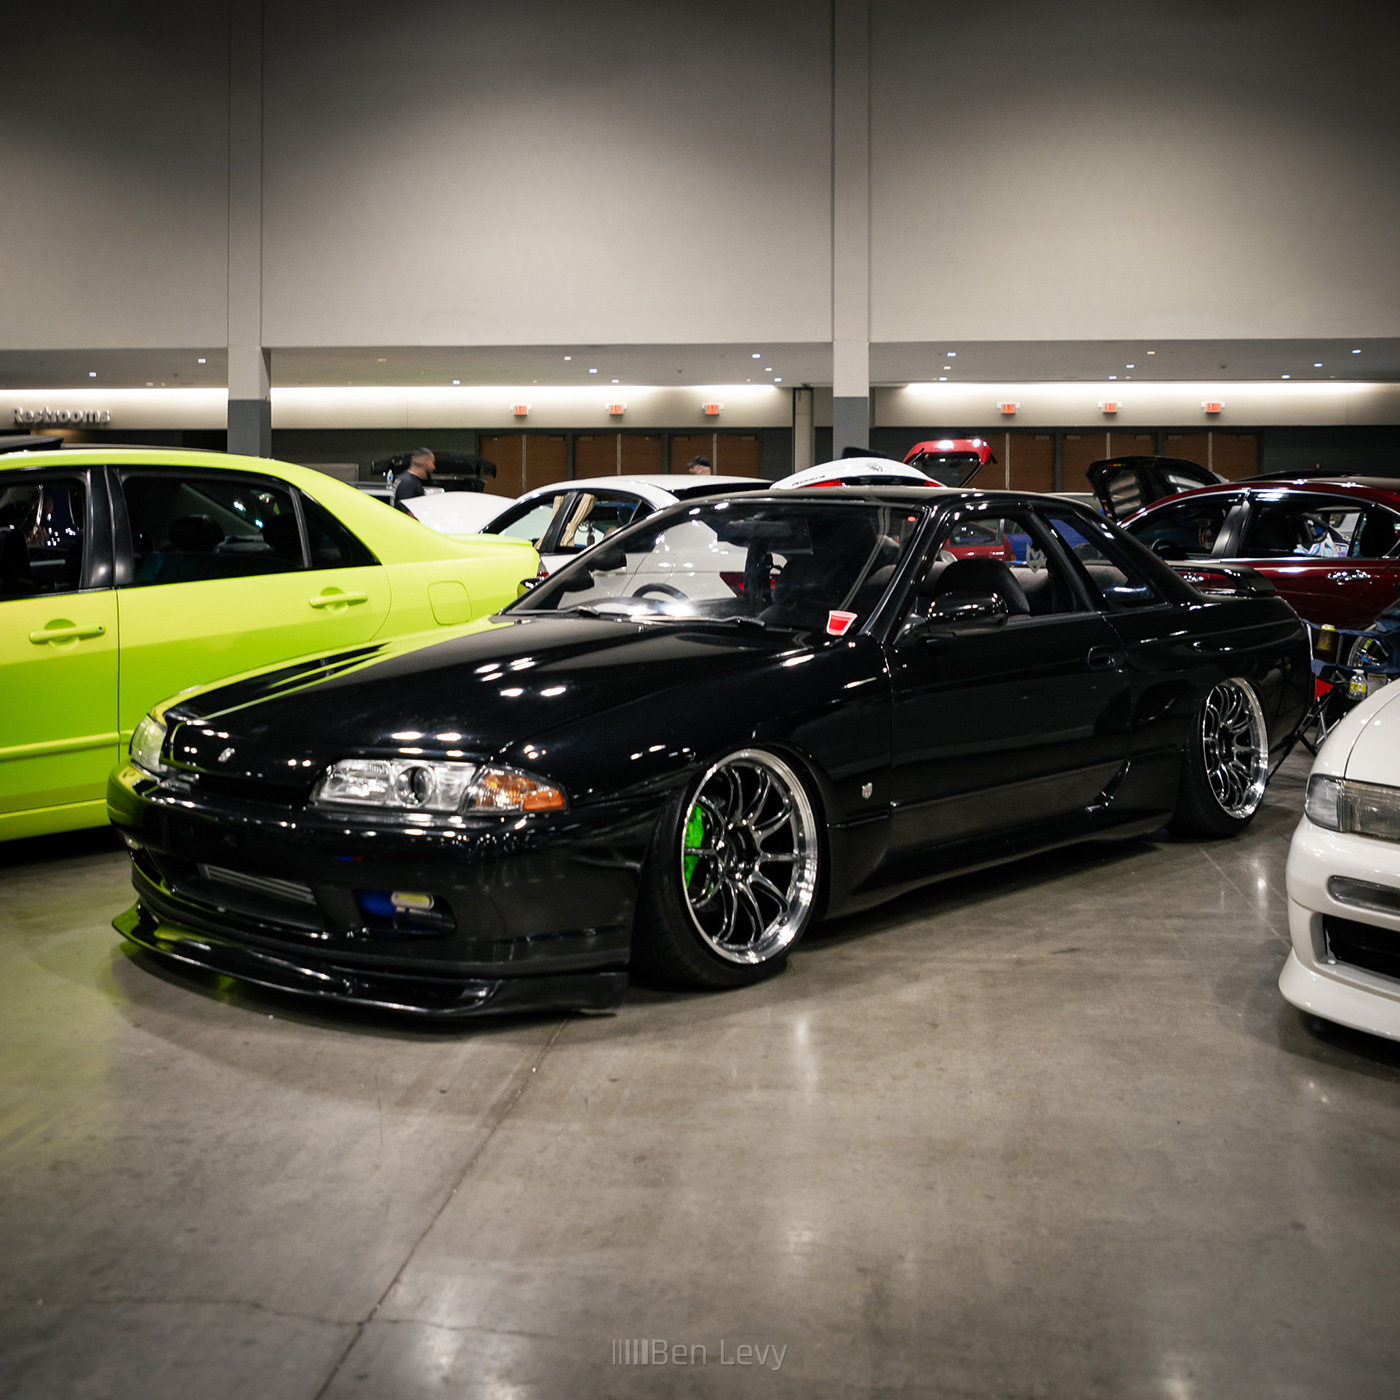 Bagged Nissan Skyline Coupe at Tuner Evolution